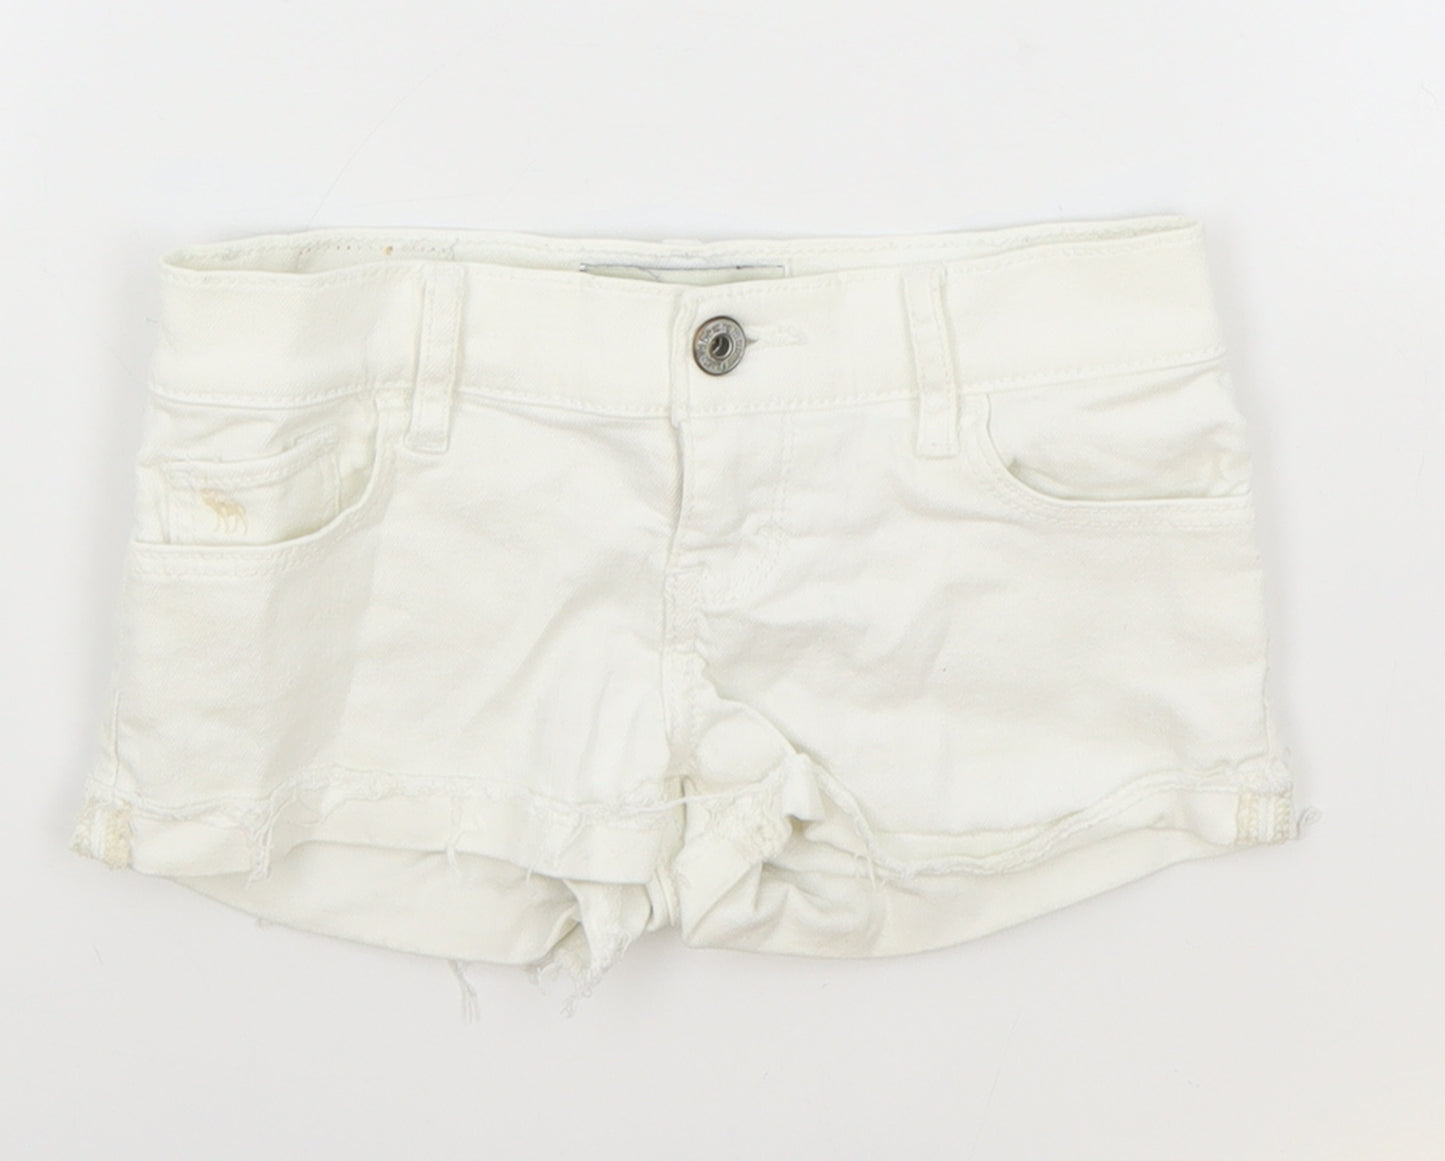 Abercrombie & Fitch Girls White Cotton Hot Pants Shorts Size 10 Years Regular Zip